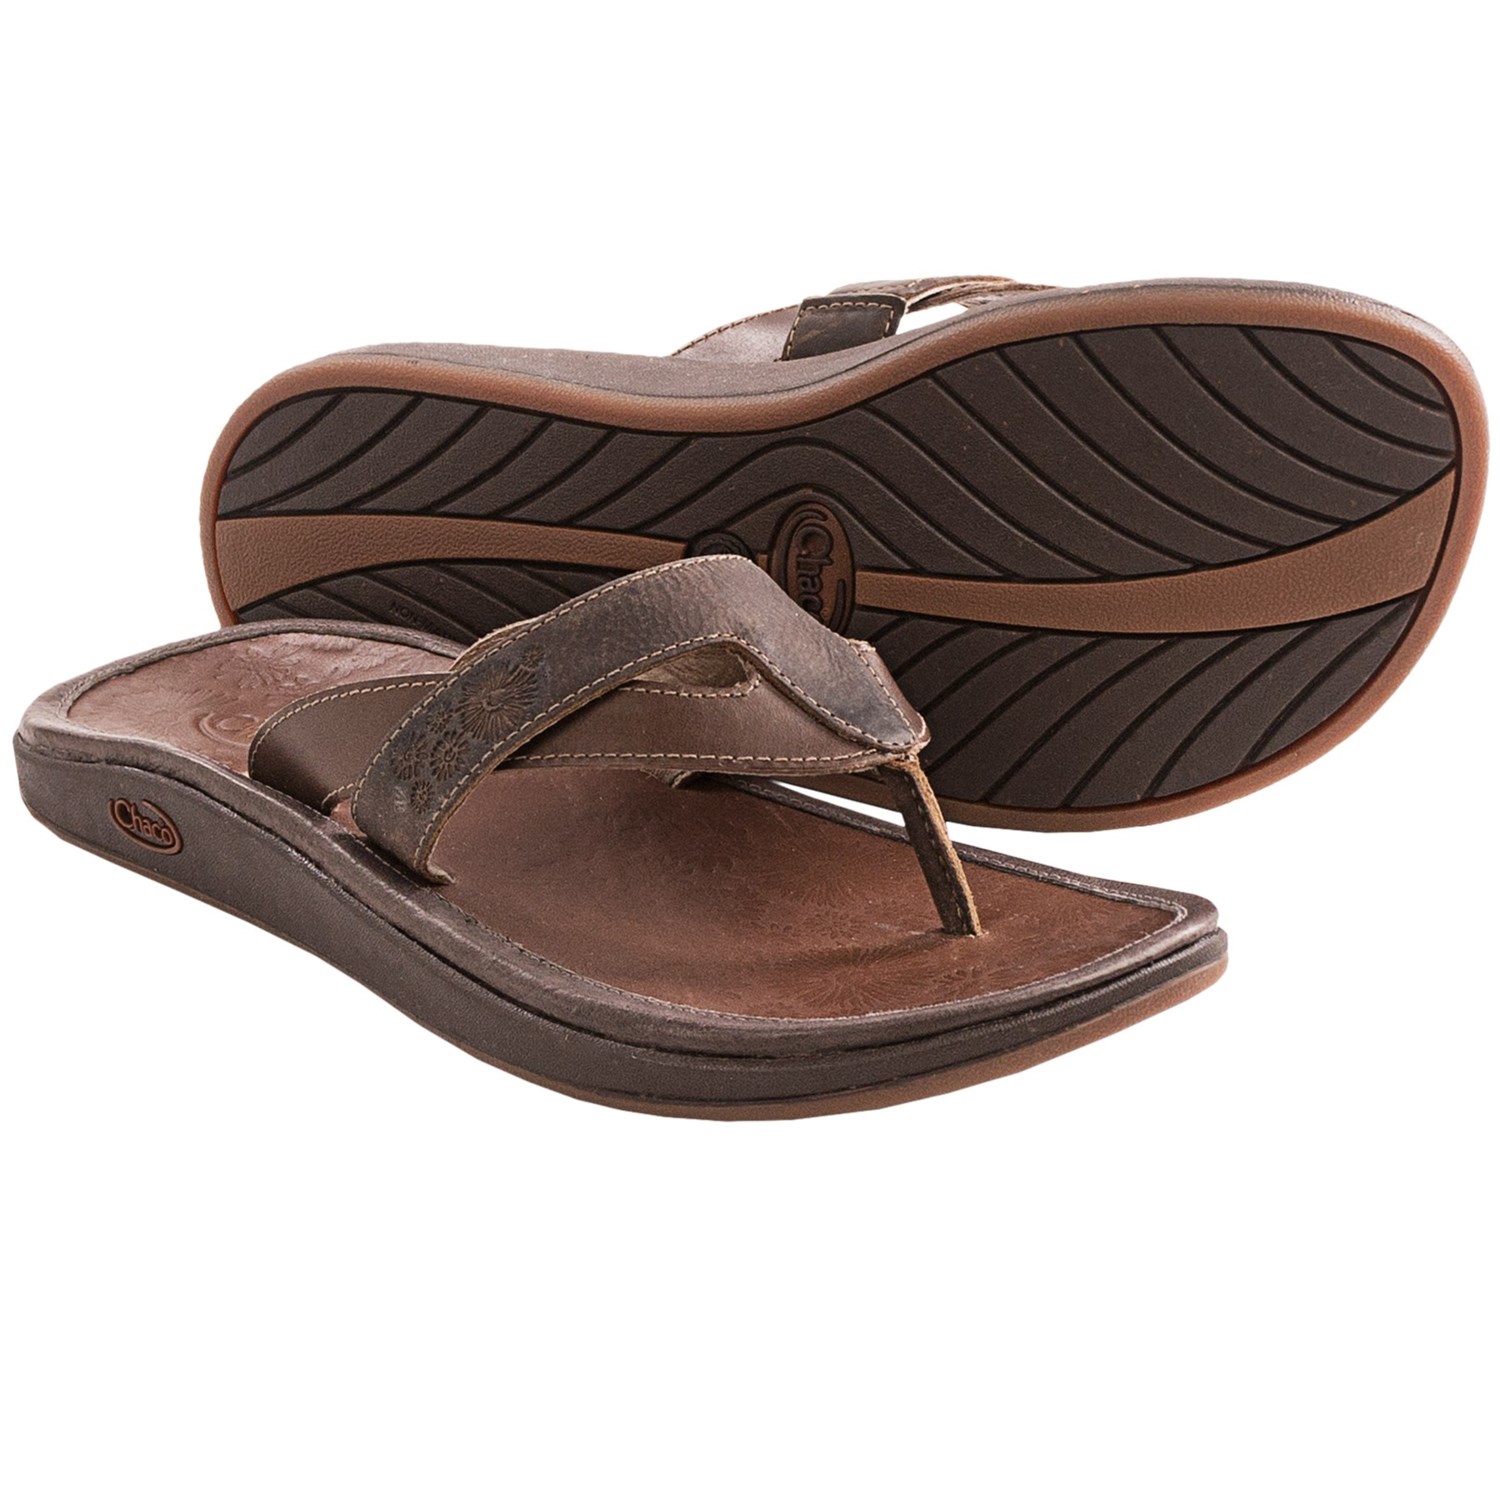 Chaco Palma Sandals (For Women) in Chocolate Brown